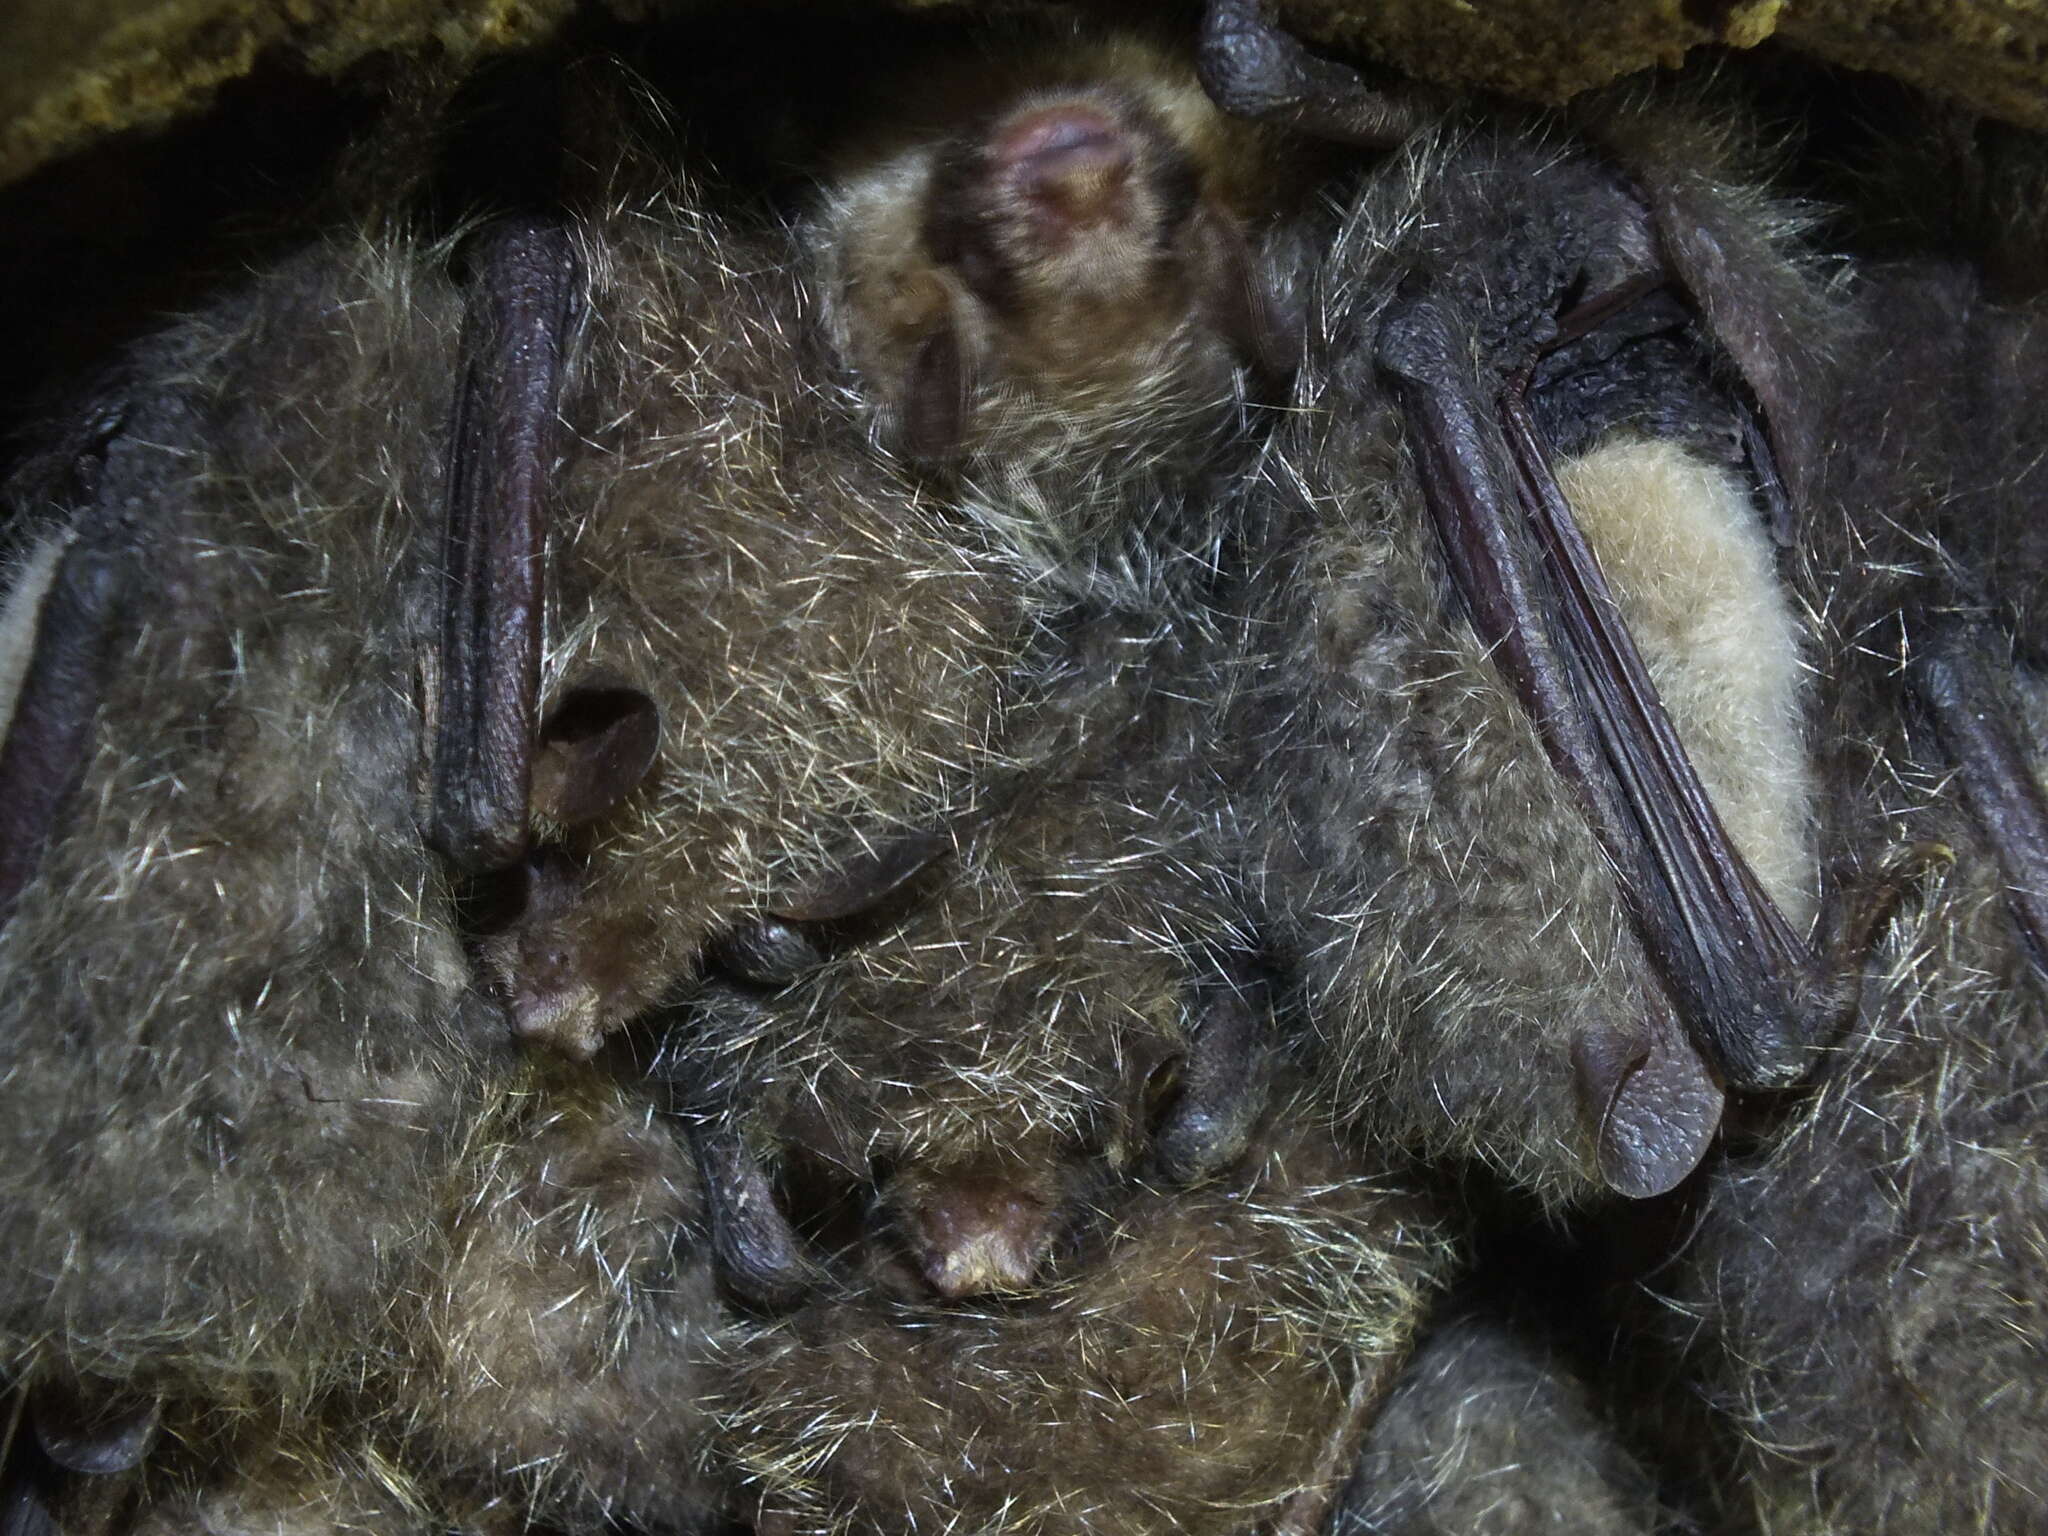 Image of Greater Tube-nosed Bat